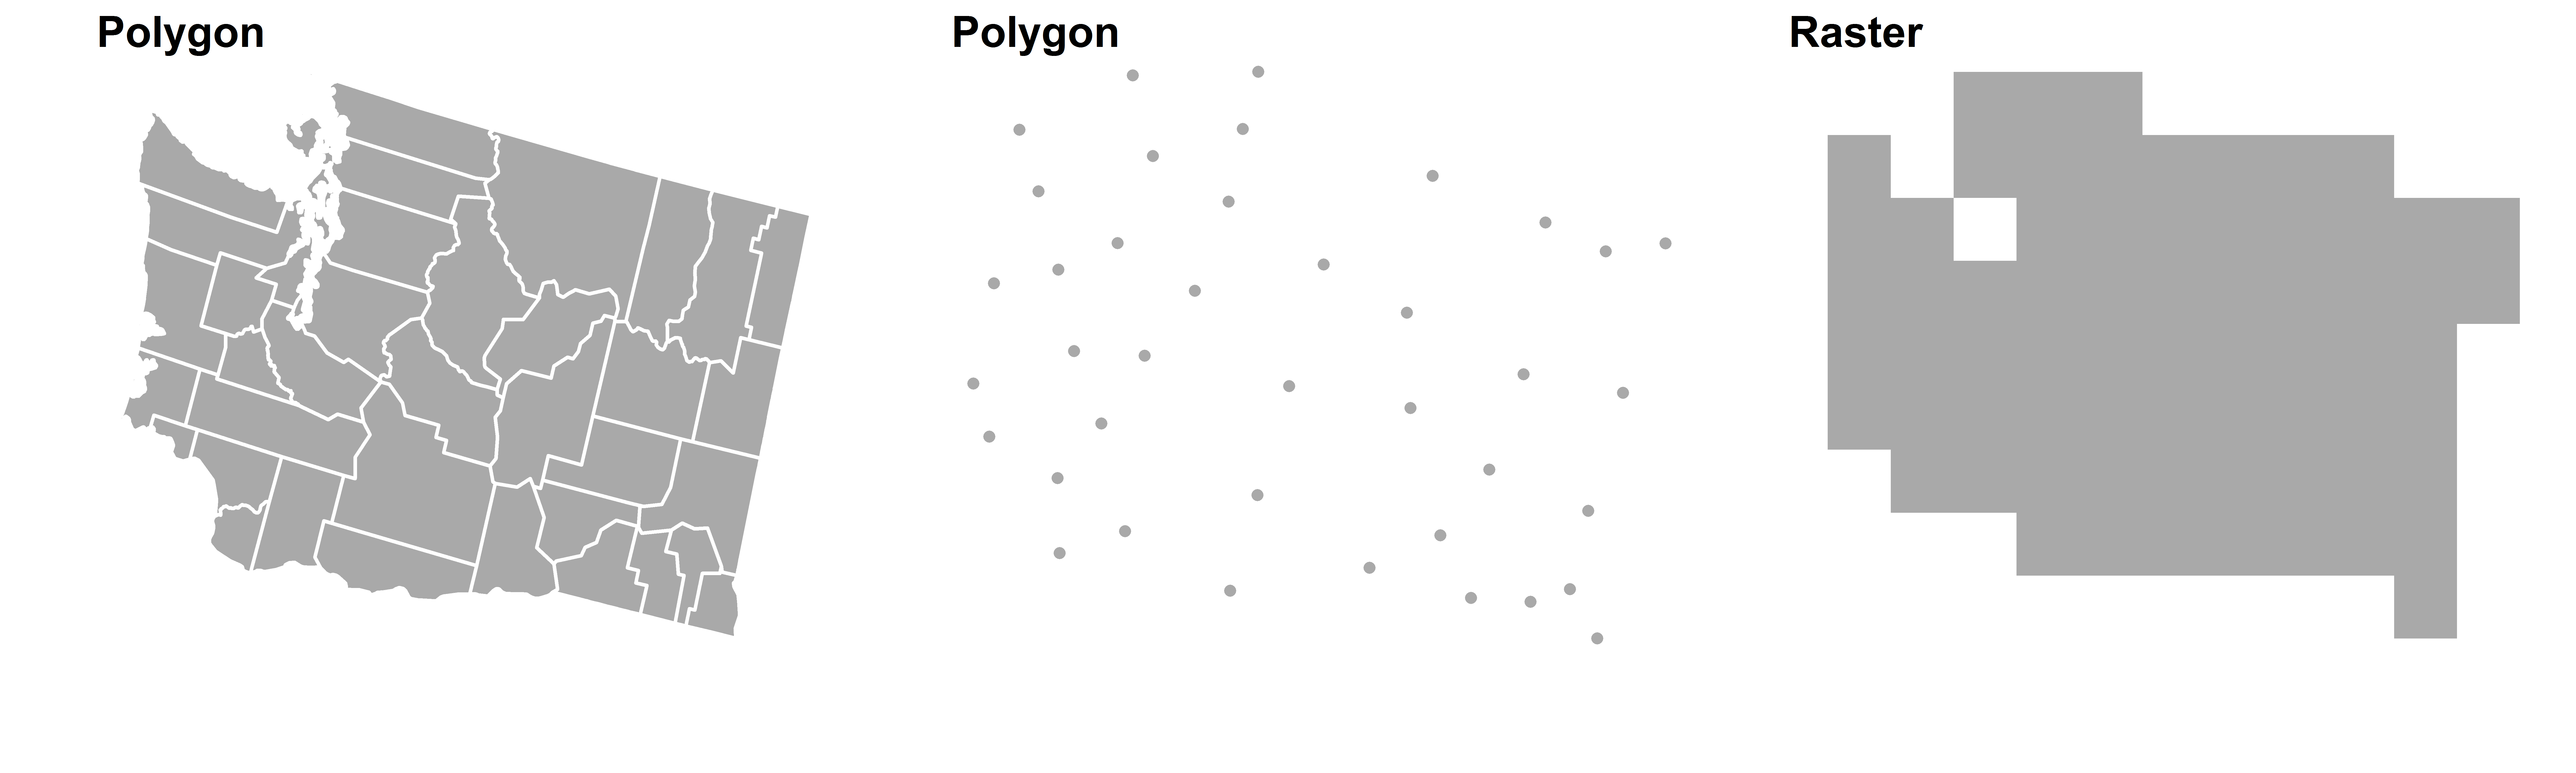 Mapping Point, Polygon, and Raster Data